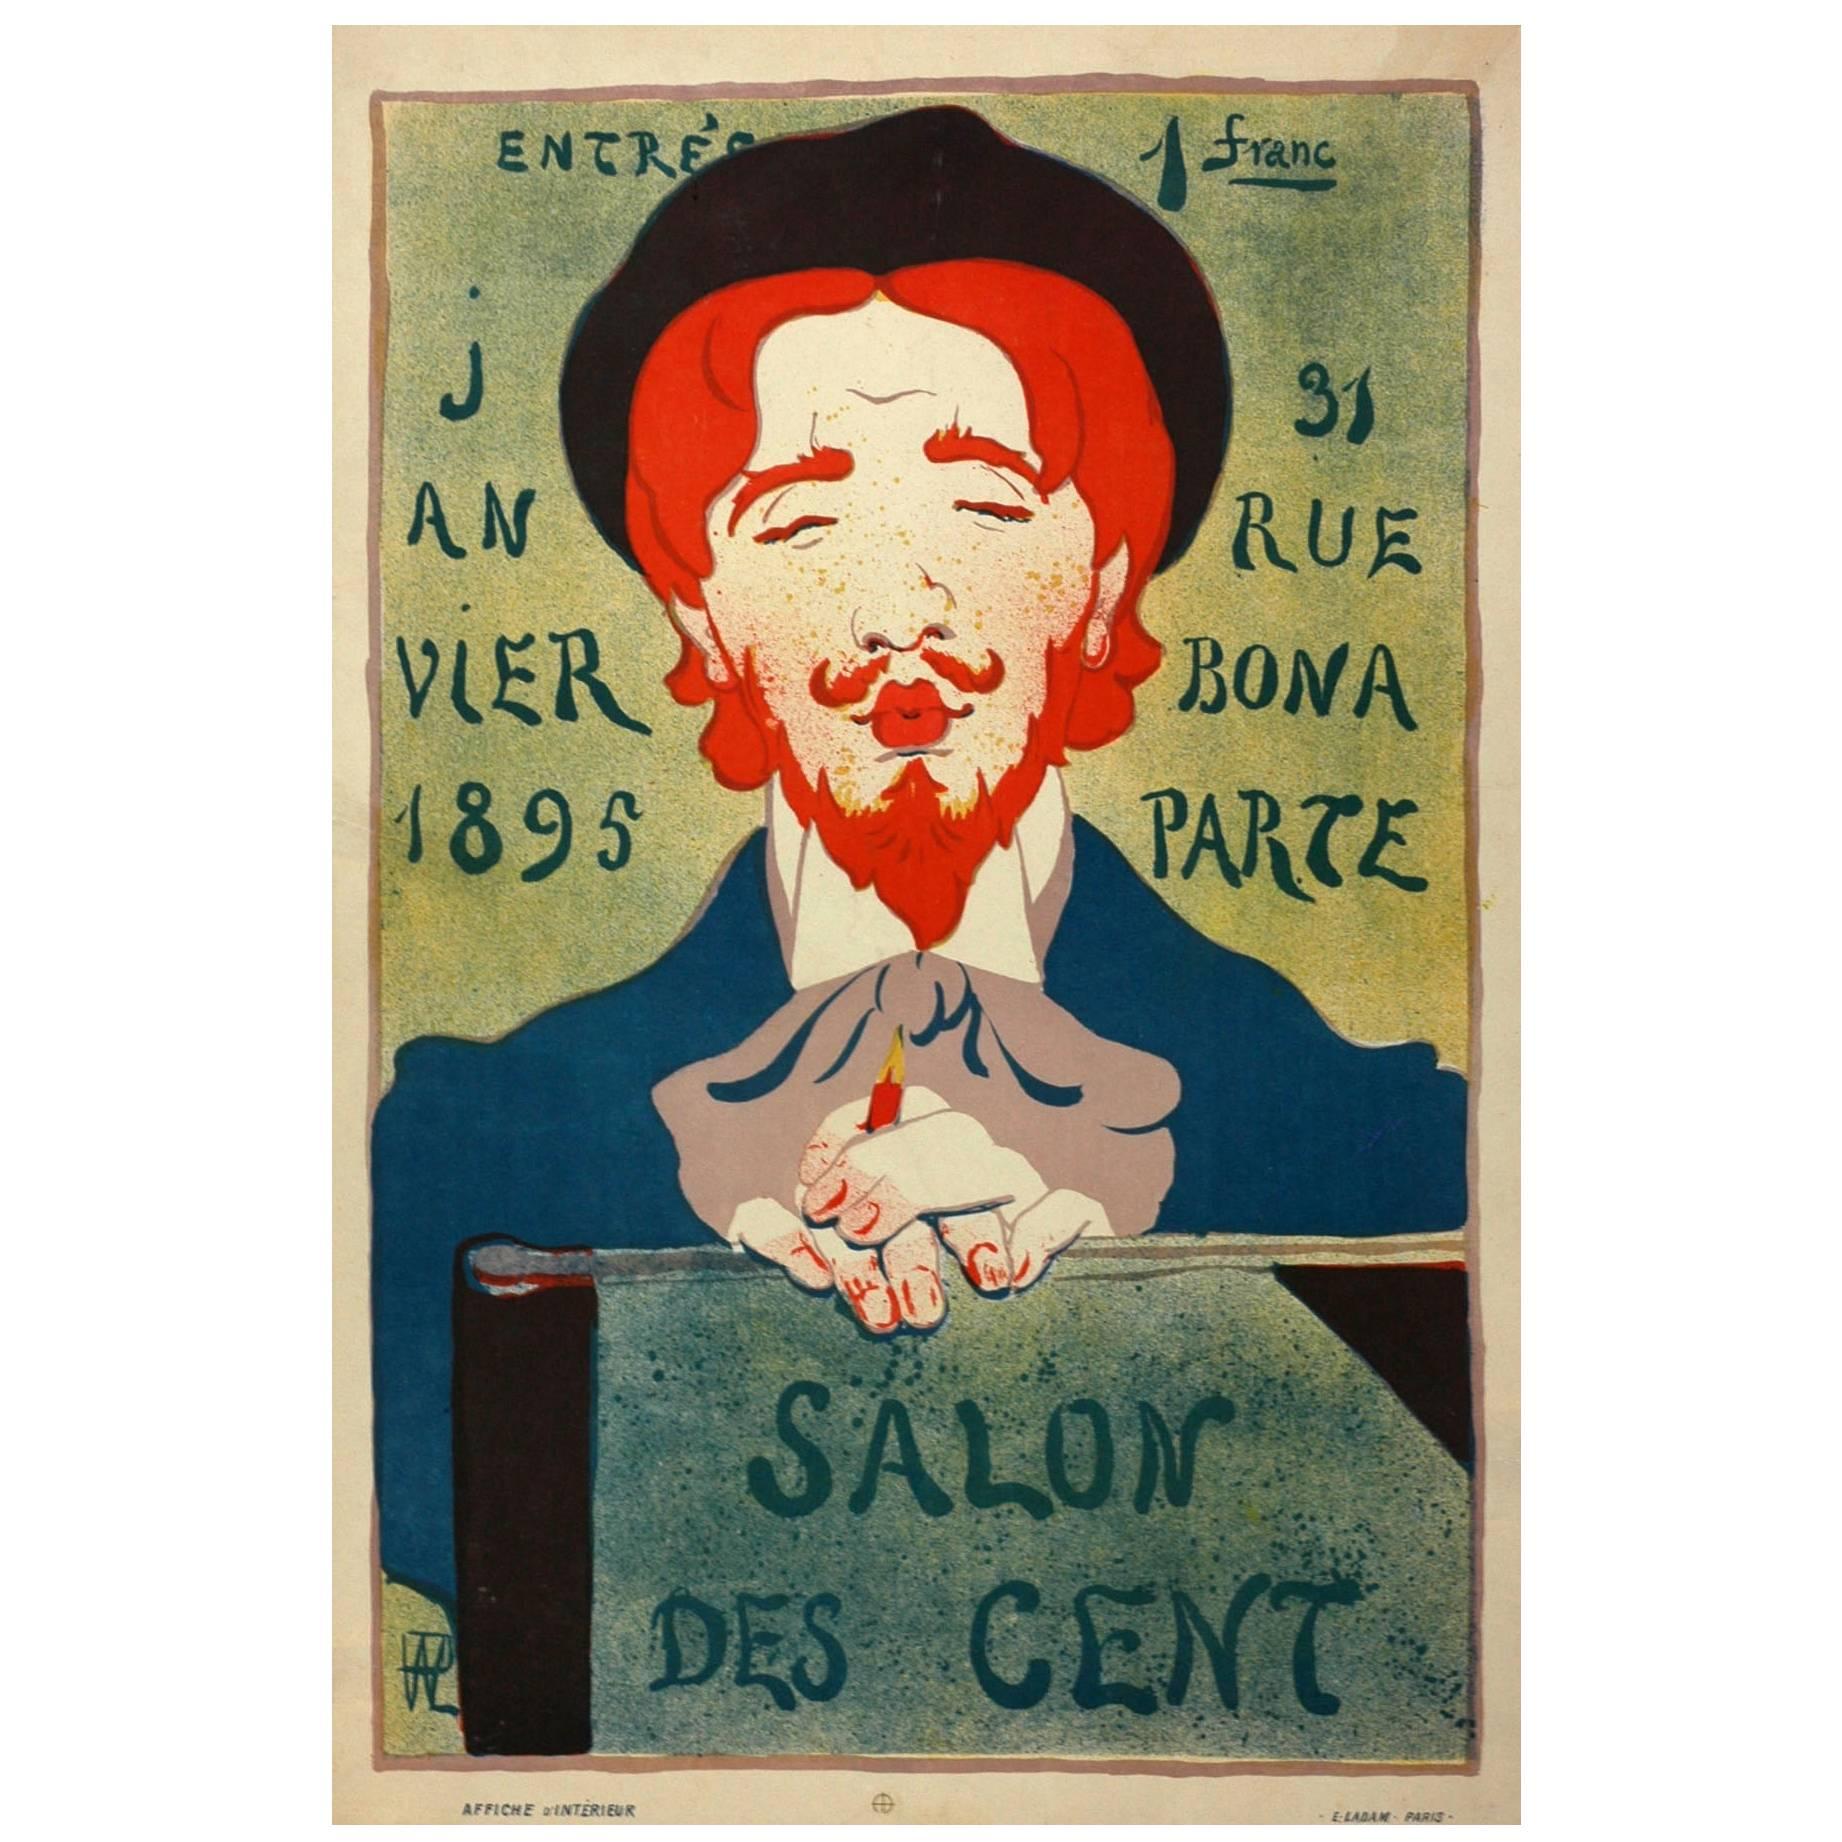 Original French Antique Poster by Hermann-Paul for the 1895 Salon des Cent